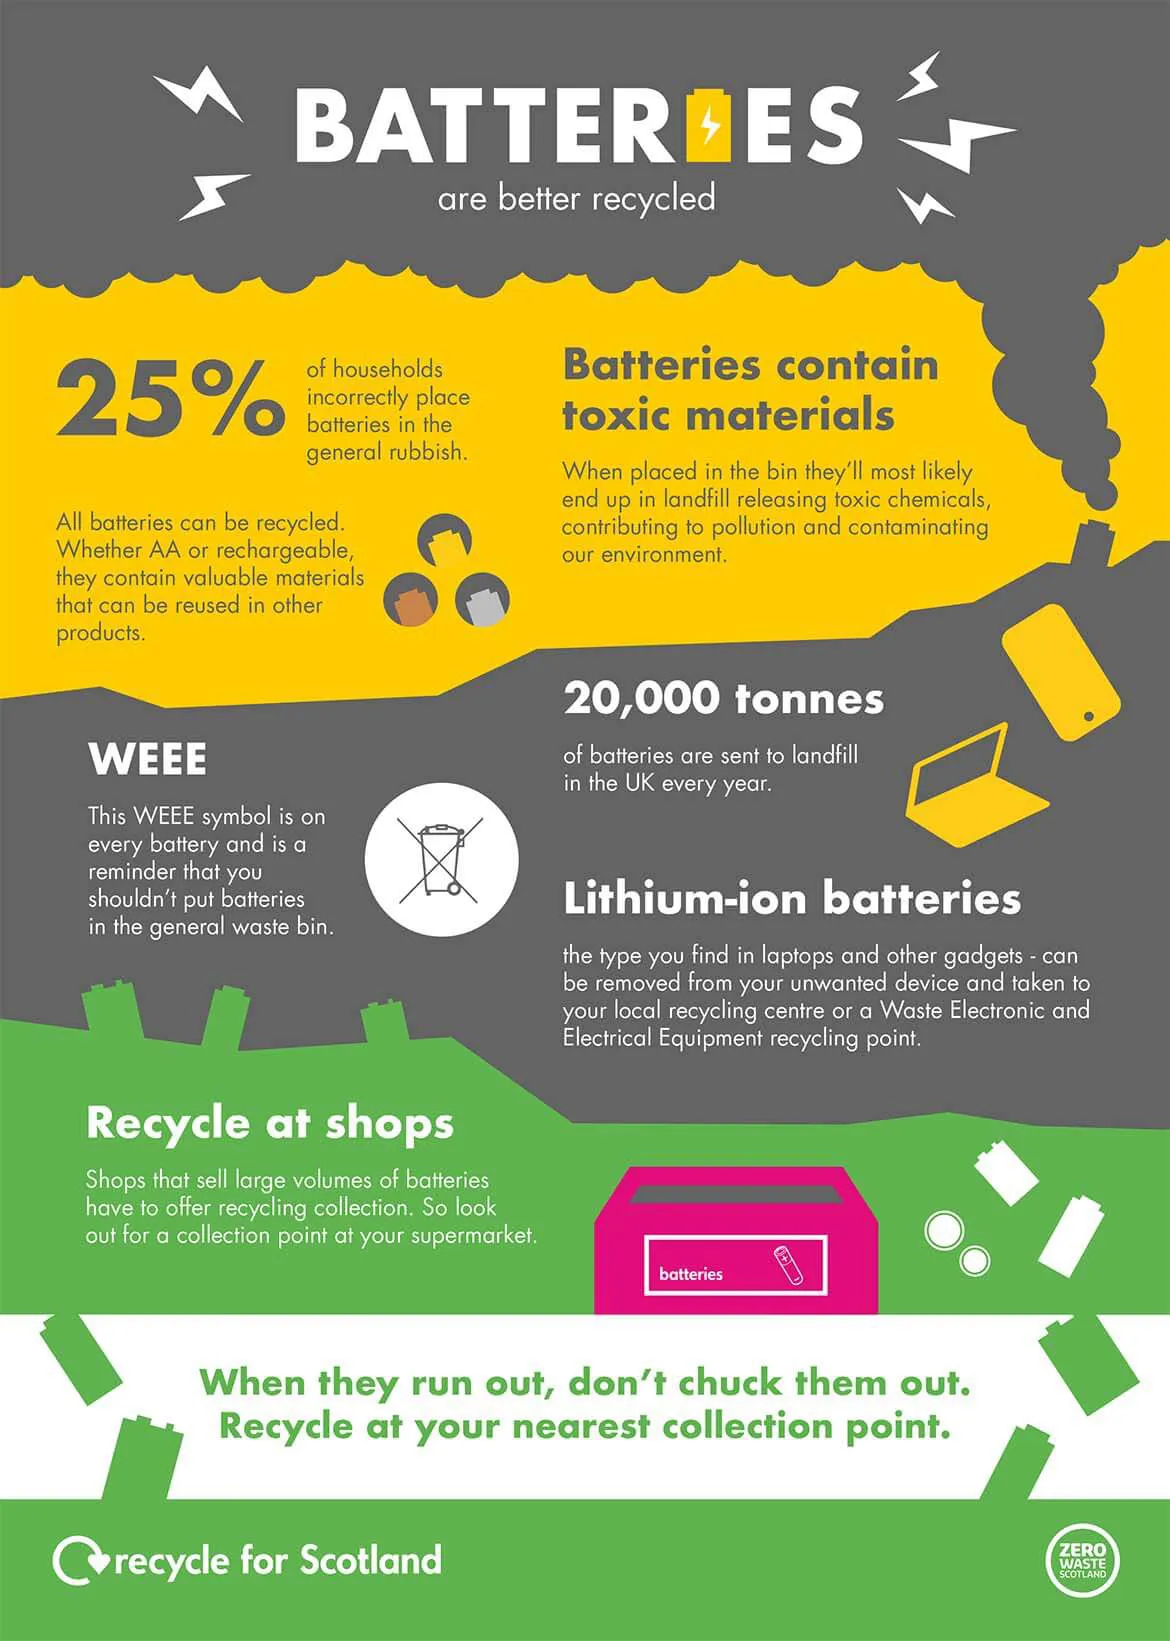 Batteries are better recycled